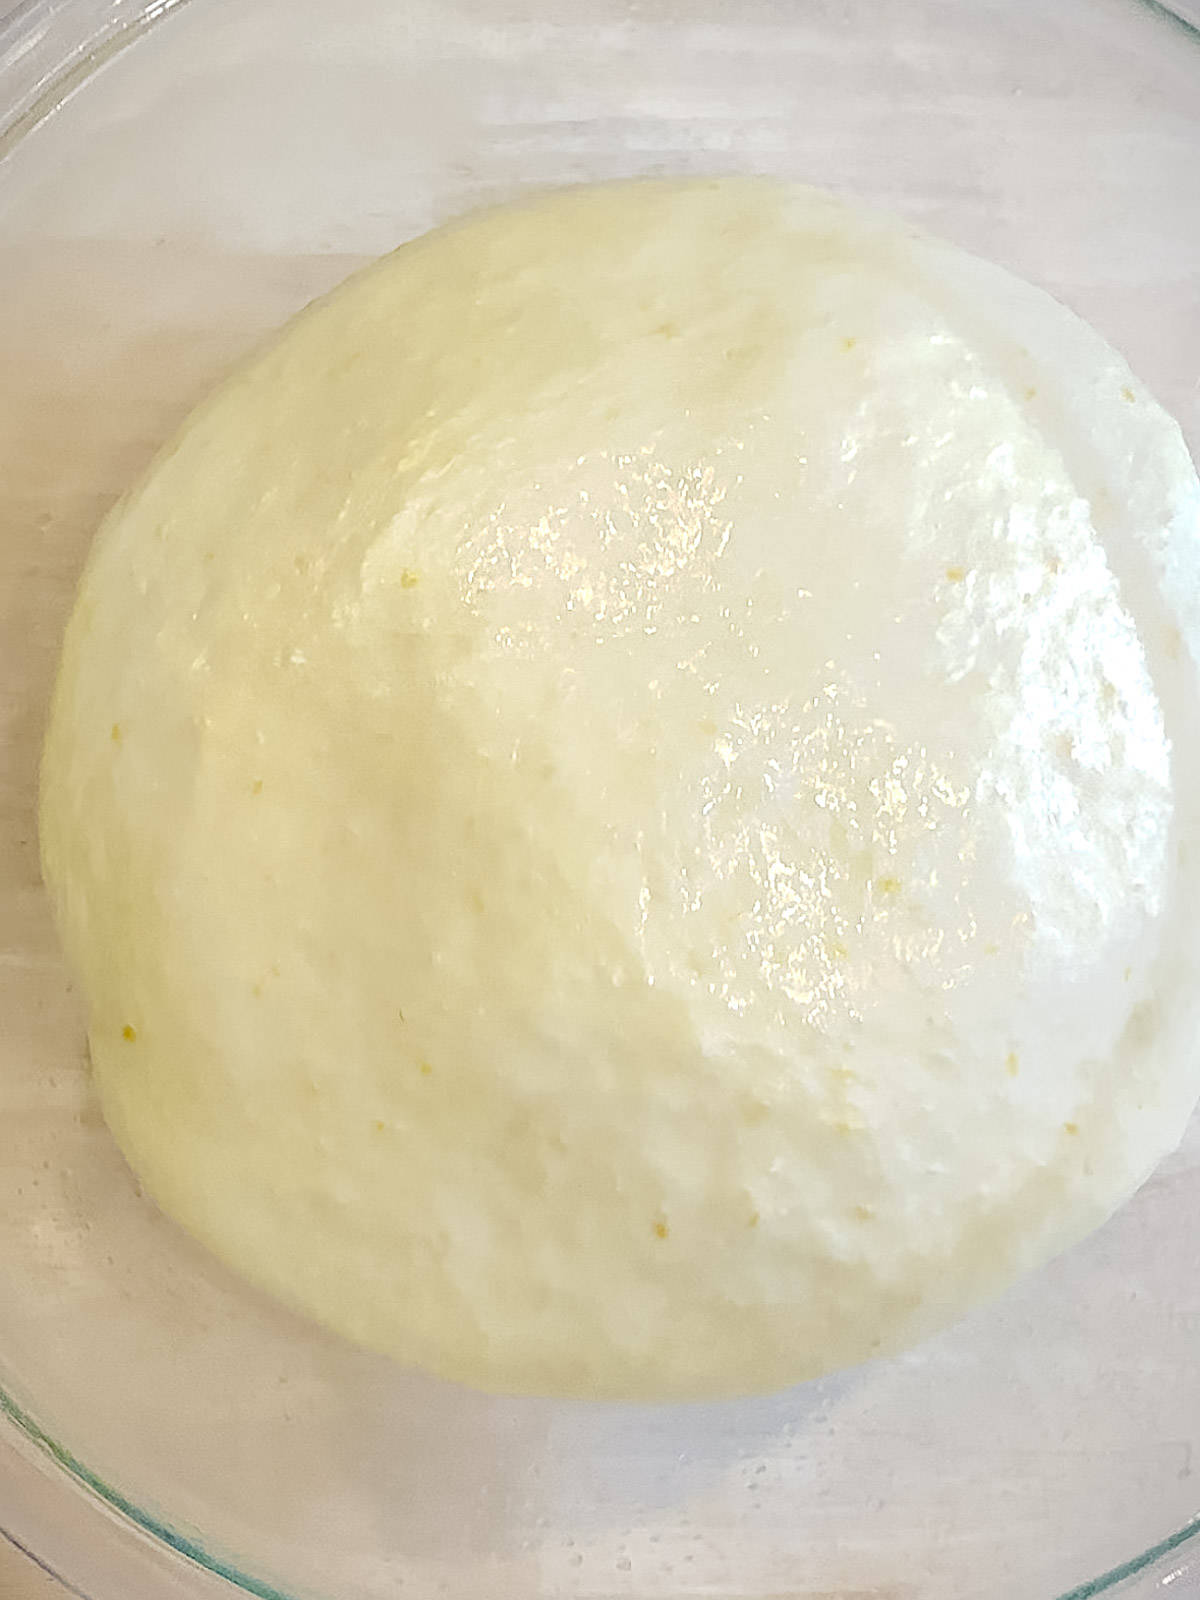 Cinnamon roll dough after rising for two hours.